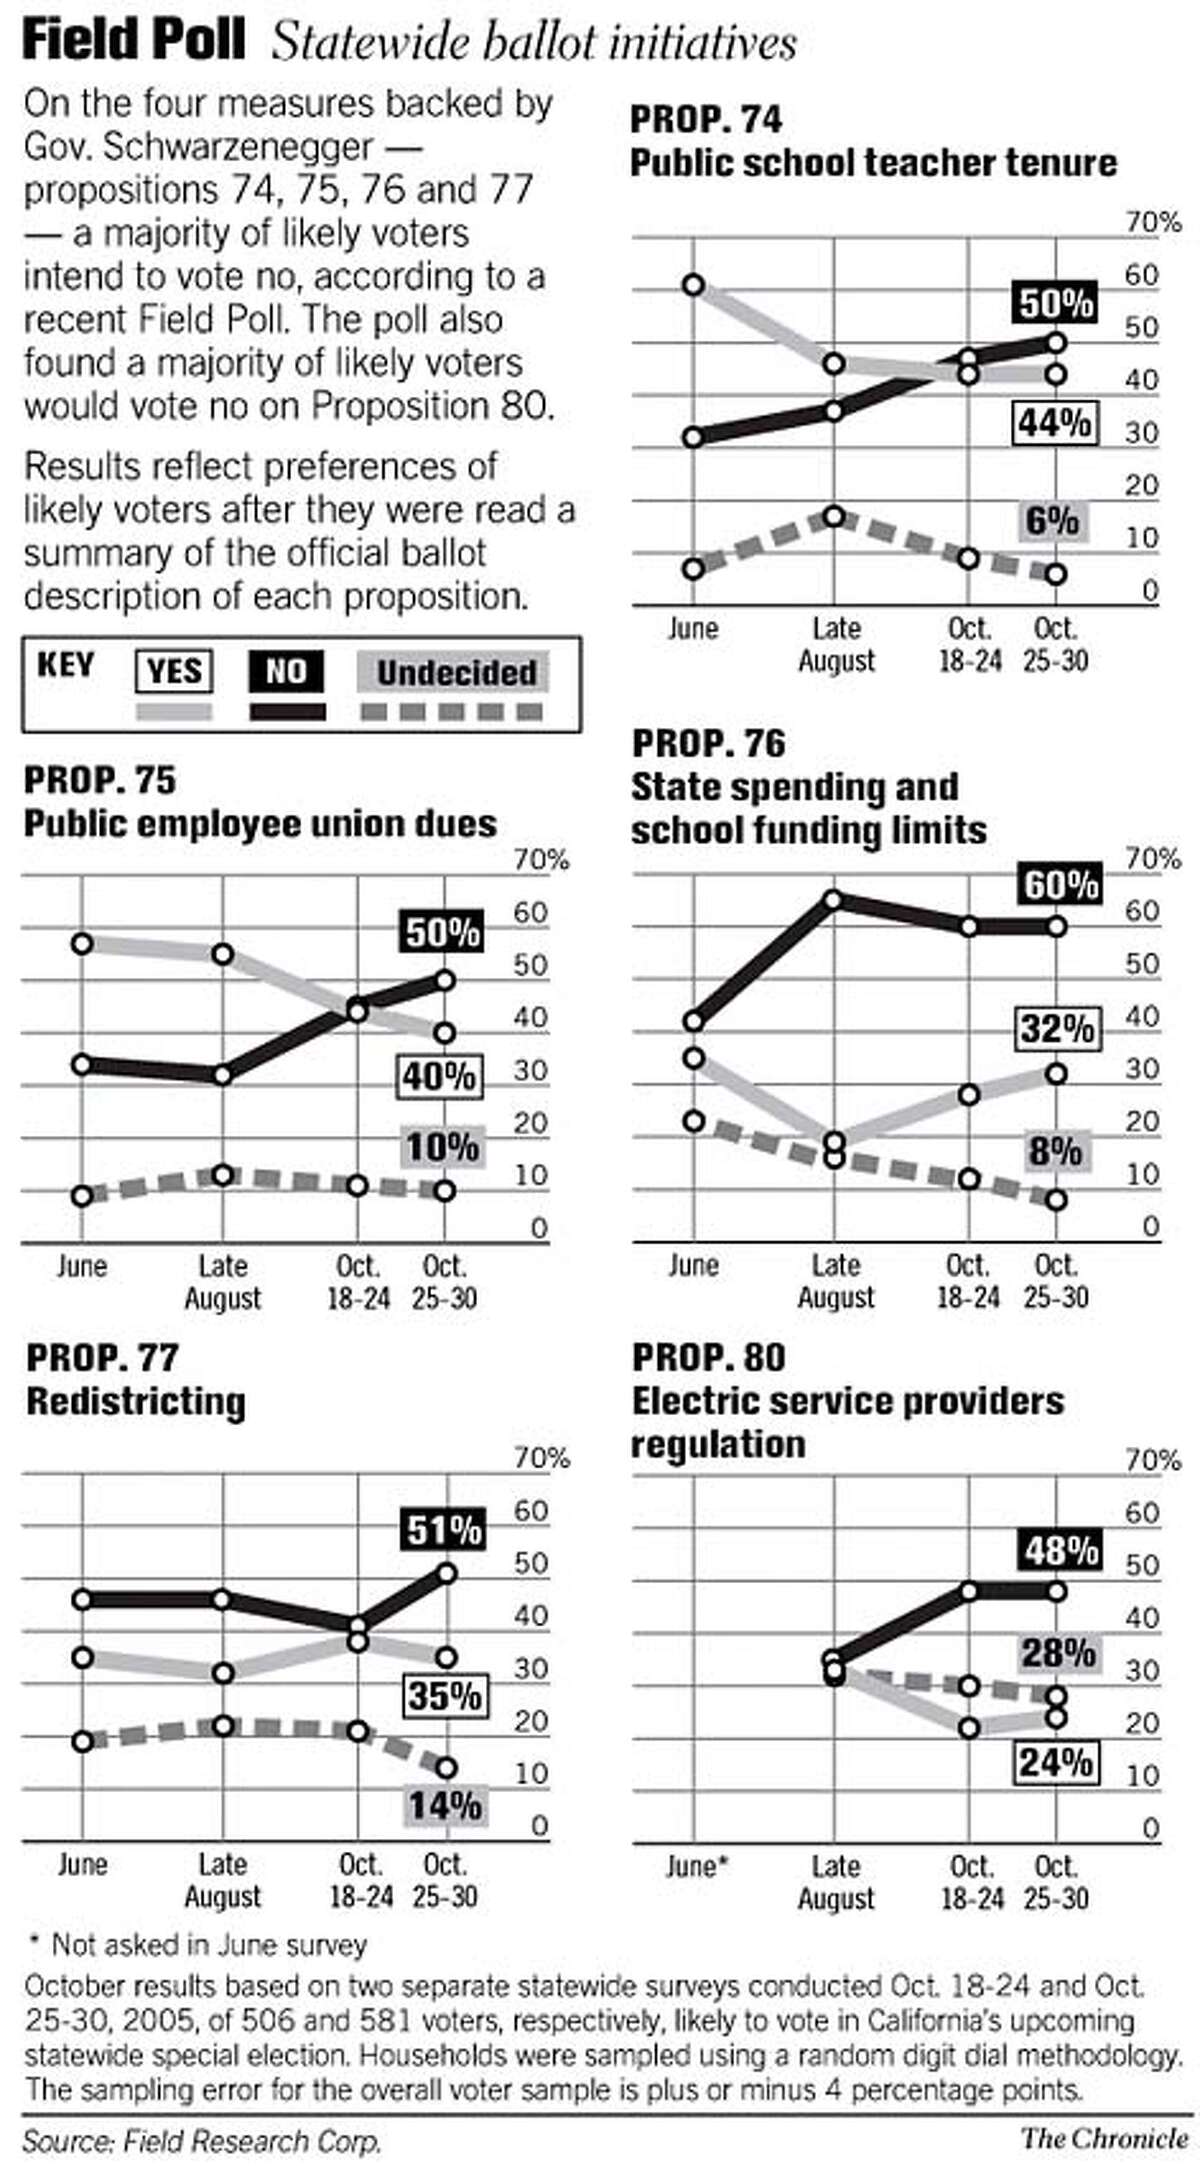 Field Poll / Statewide Ballot Initiatives. Chronicle Graphic